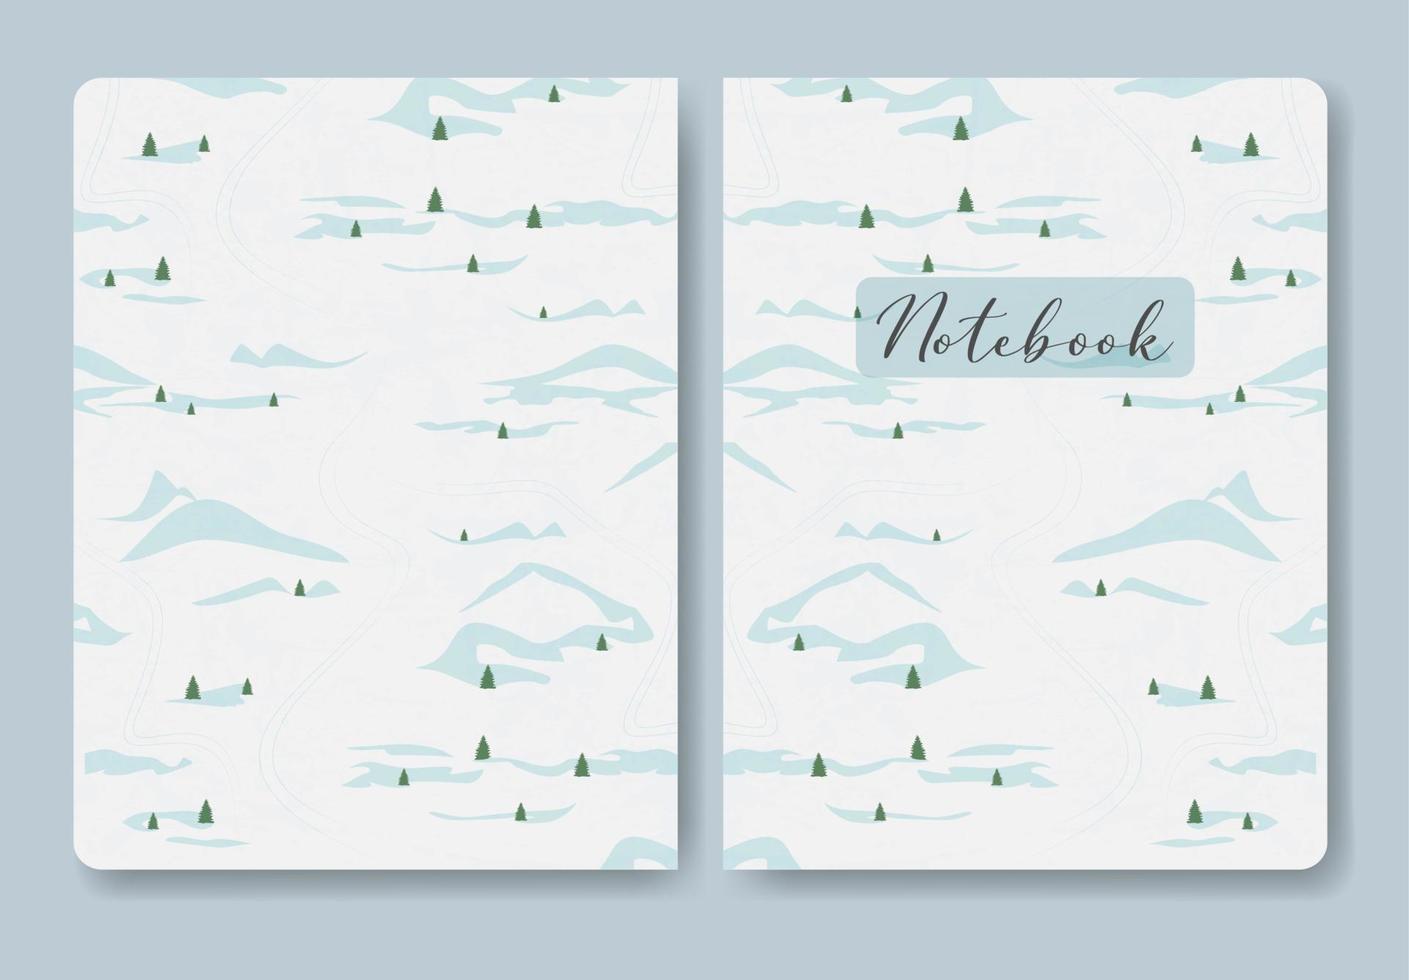 Notebook cover with winter snowy hills landscape illustration. Vector art print. Applicable for planner and notebooks, first and last a5 page.